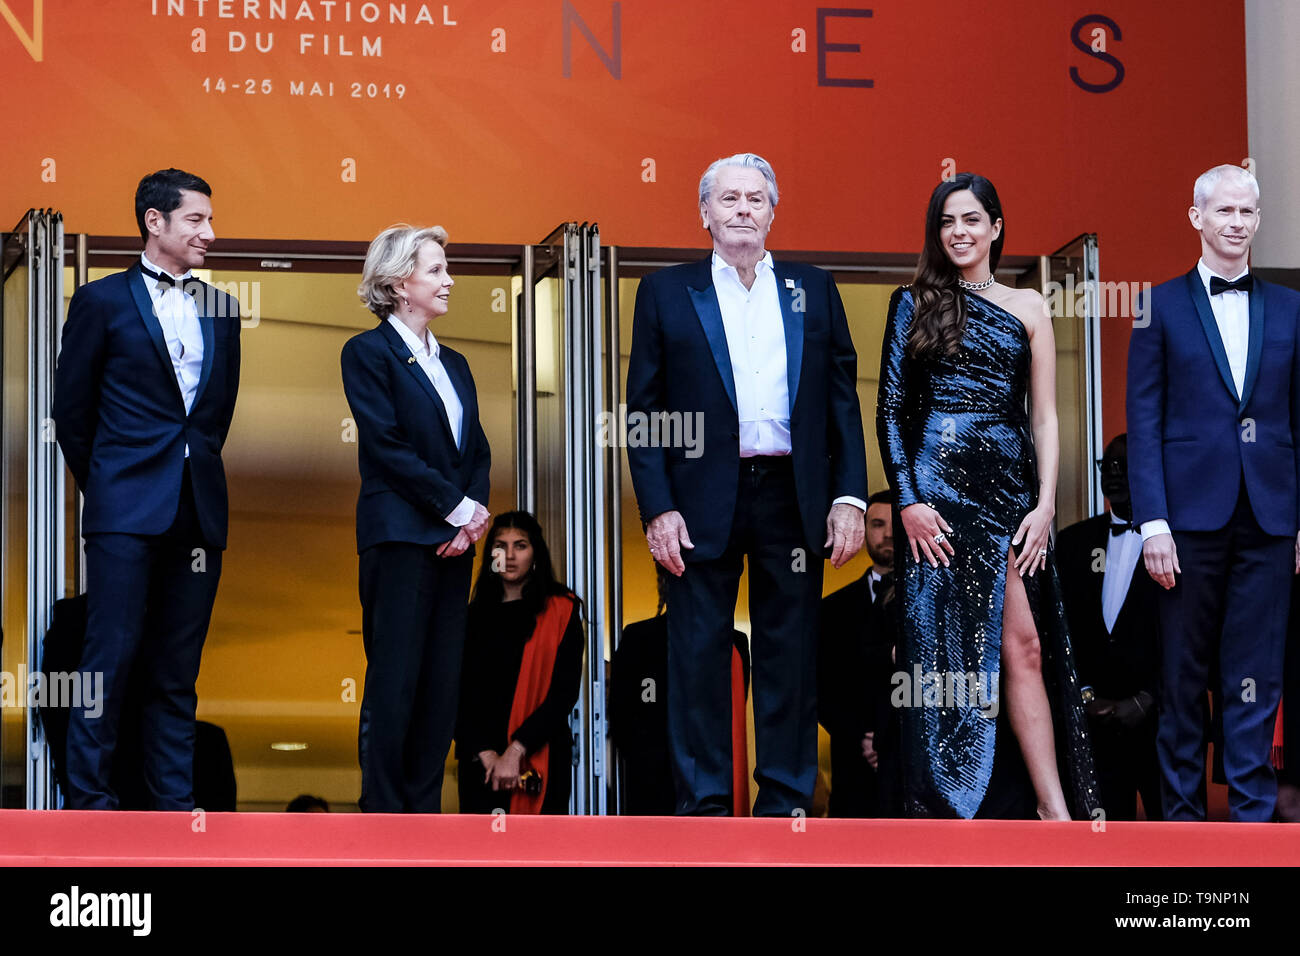 Cannes, France. 19th May, 2019. Alain Delon poses on the red carpet for A Hidden Life on Sunday 19 May 2019 at the 72nd Festival de Cannes, Palais des Festivals, Cannes. Pictured: Alain Delon. Picture by Credit: Julie Edwards/Alamy Live News Stock Photo